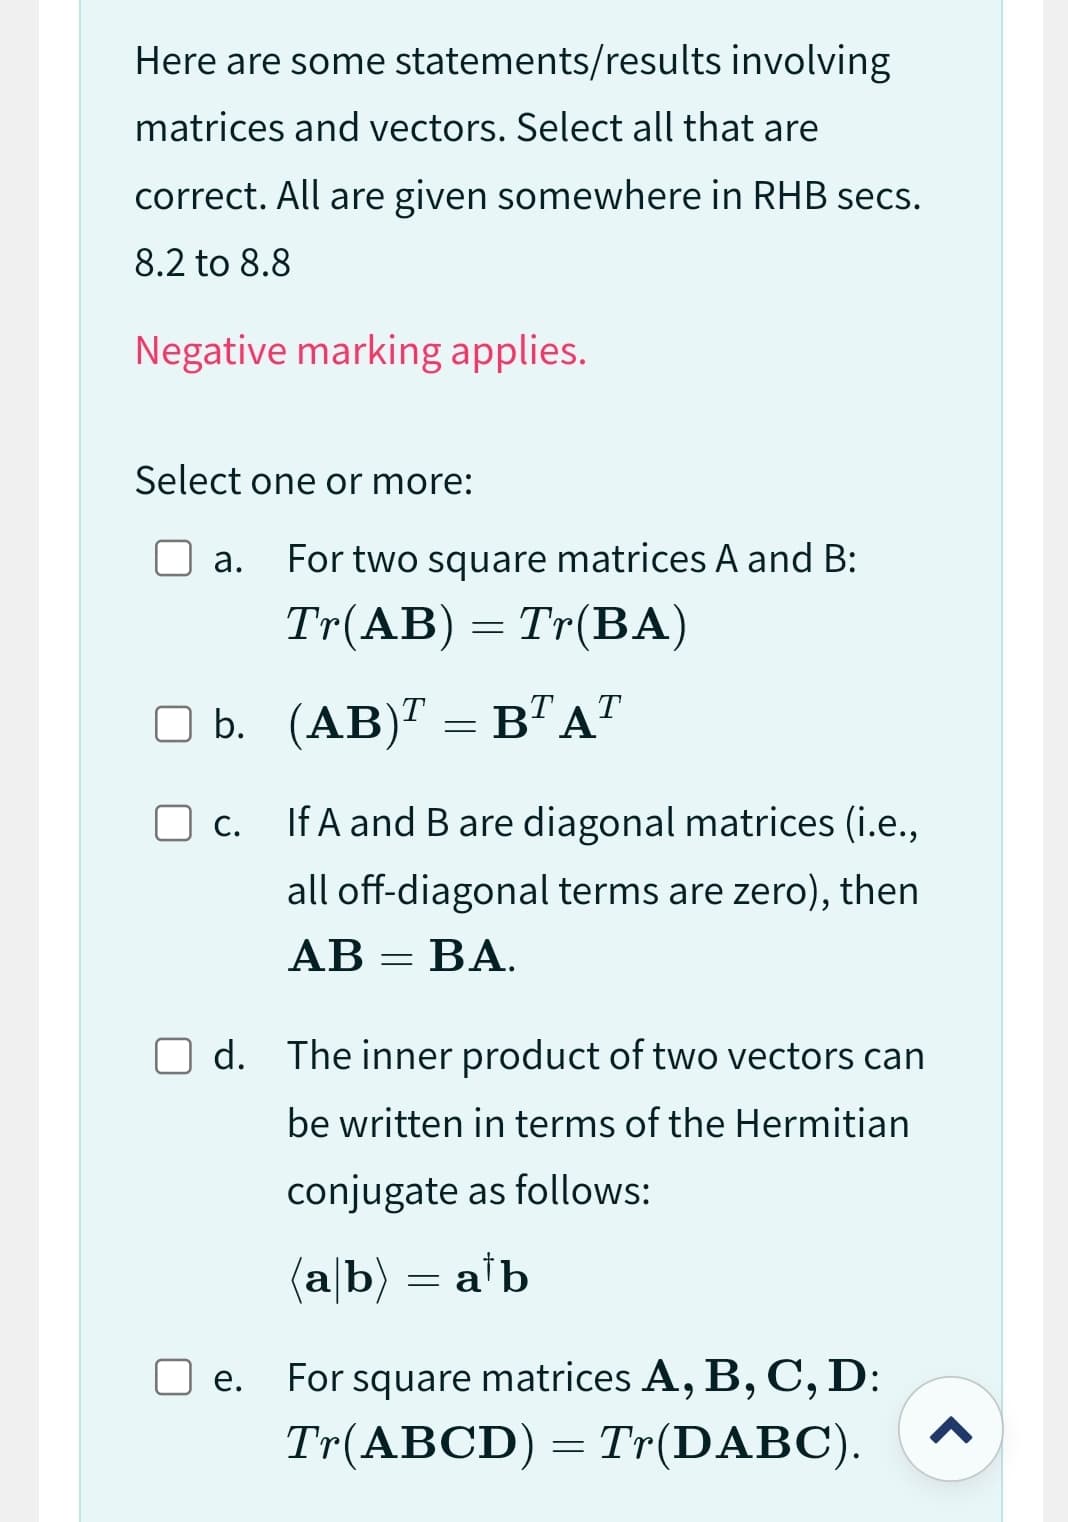 Here are some statements/results involving
matrices and vectors. Select all that are
correct. All are given somewhere in RHB secs.
8.2 to 8.8
Negative marking applies.
Select one or more:
a. For two square matrices A and B:
Tr(AB) = Tr(BA)
b. (AB)¹ = B¹A¹
C.
If A and B are diagonal matrices (i.e.,
all off-diagonal terms are zero), then
AB=BA.
Od. The inner product of two vectors can
be written in terms of the Hermitian
conjugate as follows:
(a/b) = a¹b
e.
For square matrices A, B, C, D:
Tr(ABCD)=Tr(DABC).